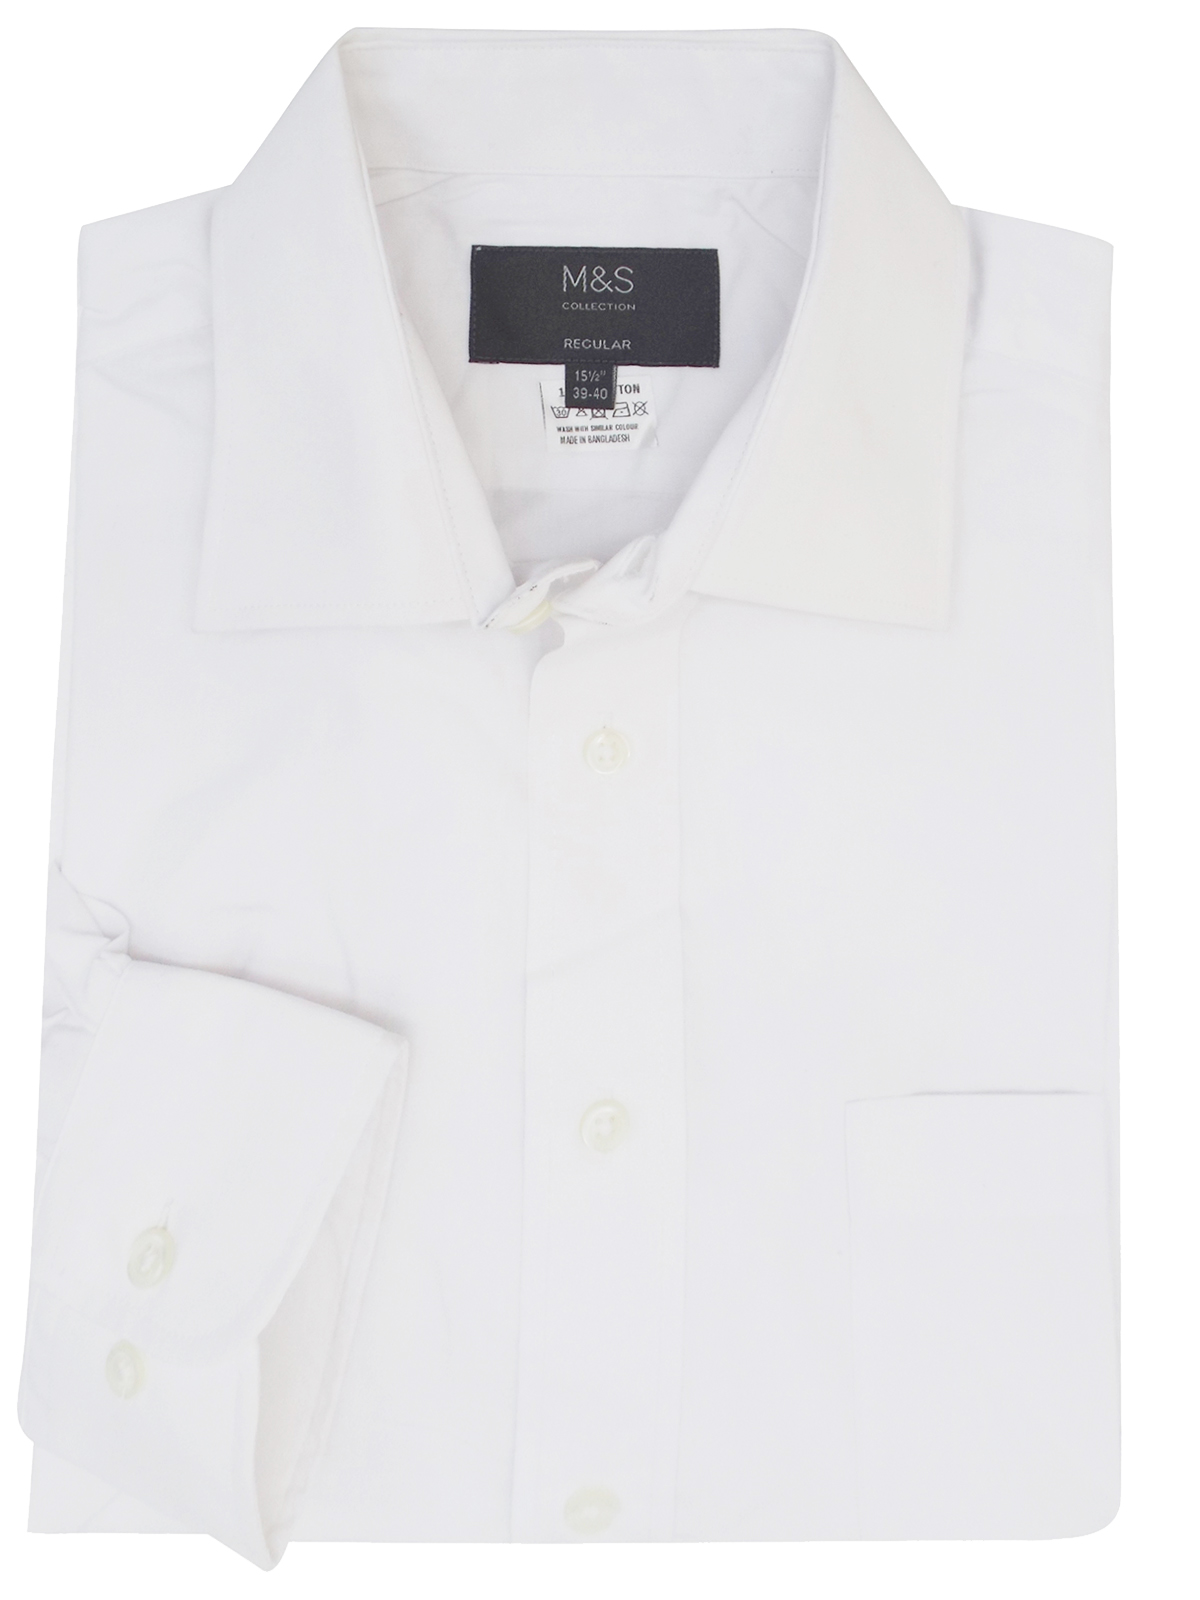 Marks and Spencer - - M&5 WHITE Pure Cotton Regular Fit Shirt - Collar ...